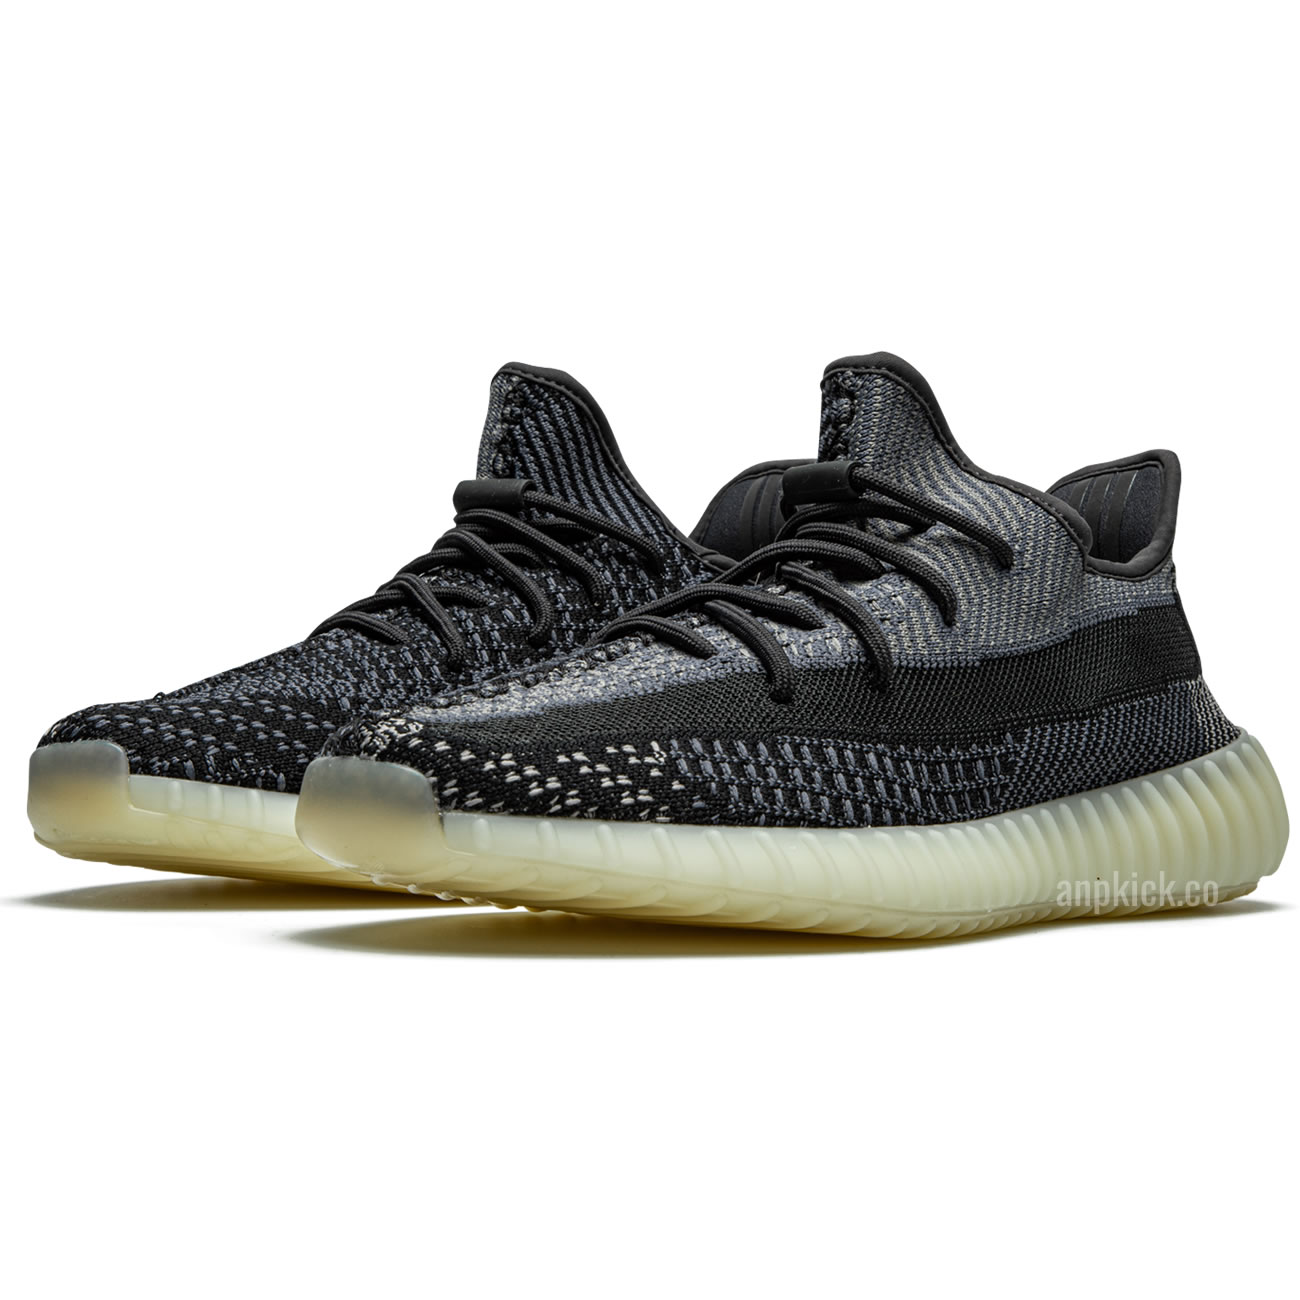 adidas Yeezy Boost 350 V2 "Carbon / Asriel" FZ5000 New Release Date